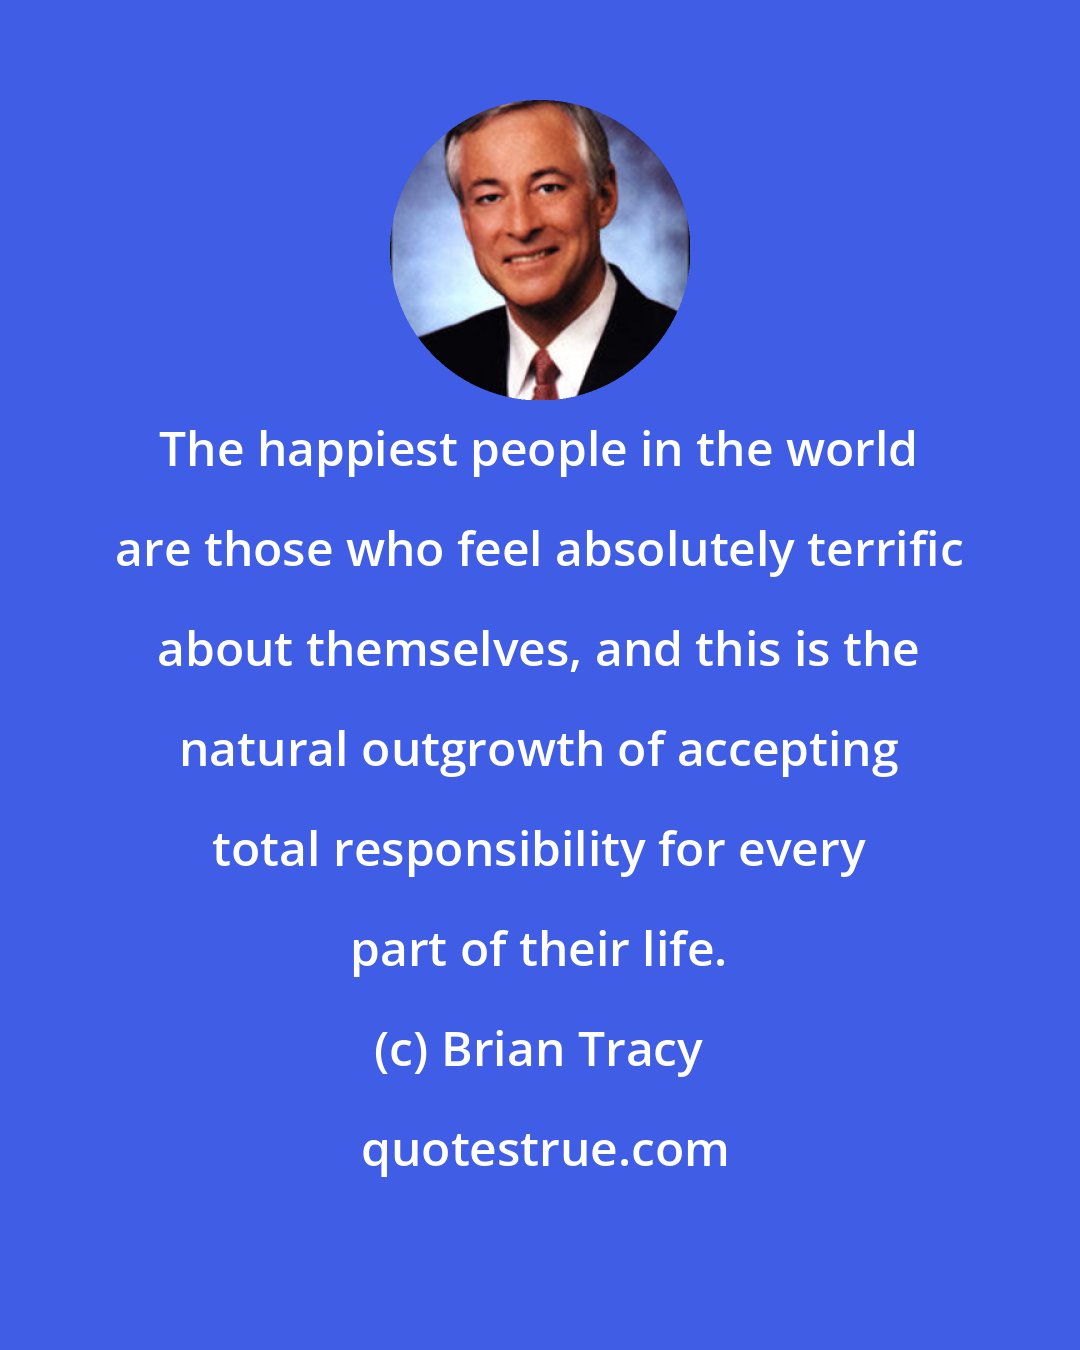 Brian Tracy: The happiest people in the world are those who feel absolutely terrific about themselves, and this is the natural outgrowth of accepting total responsibility for every part of their life.